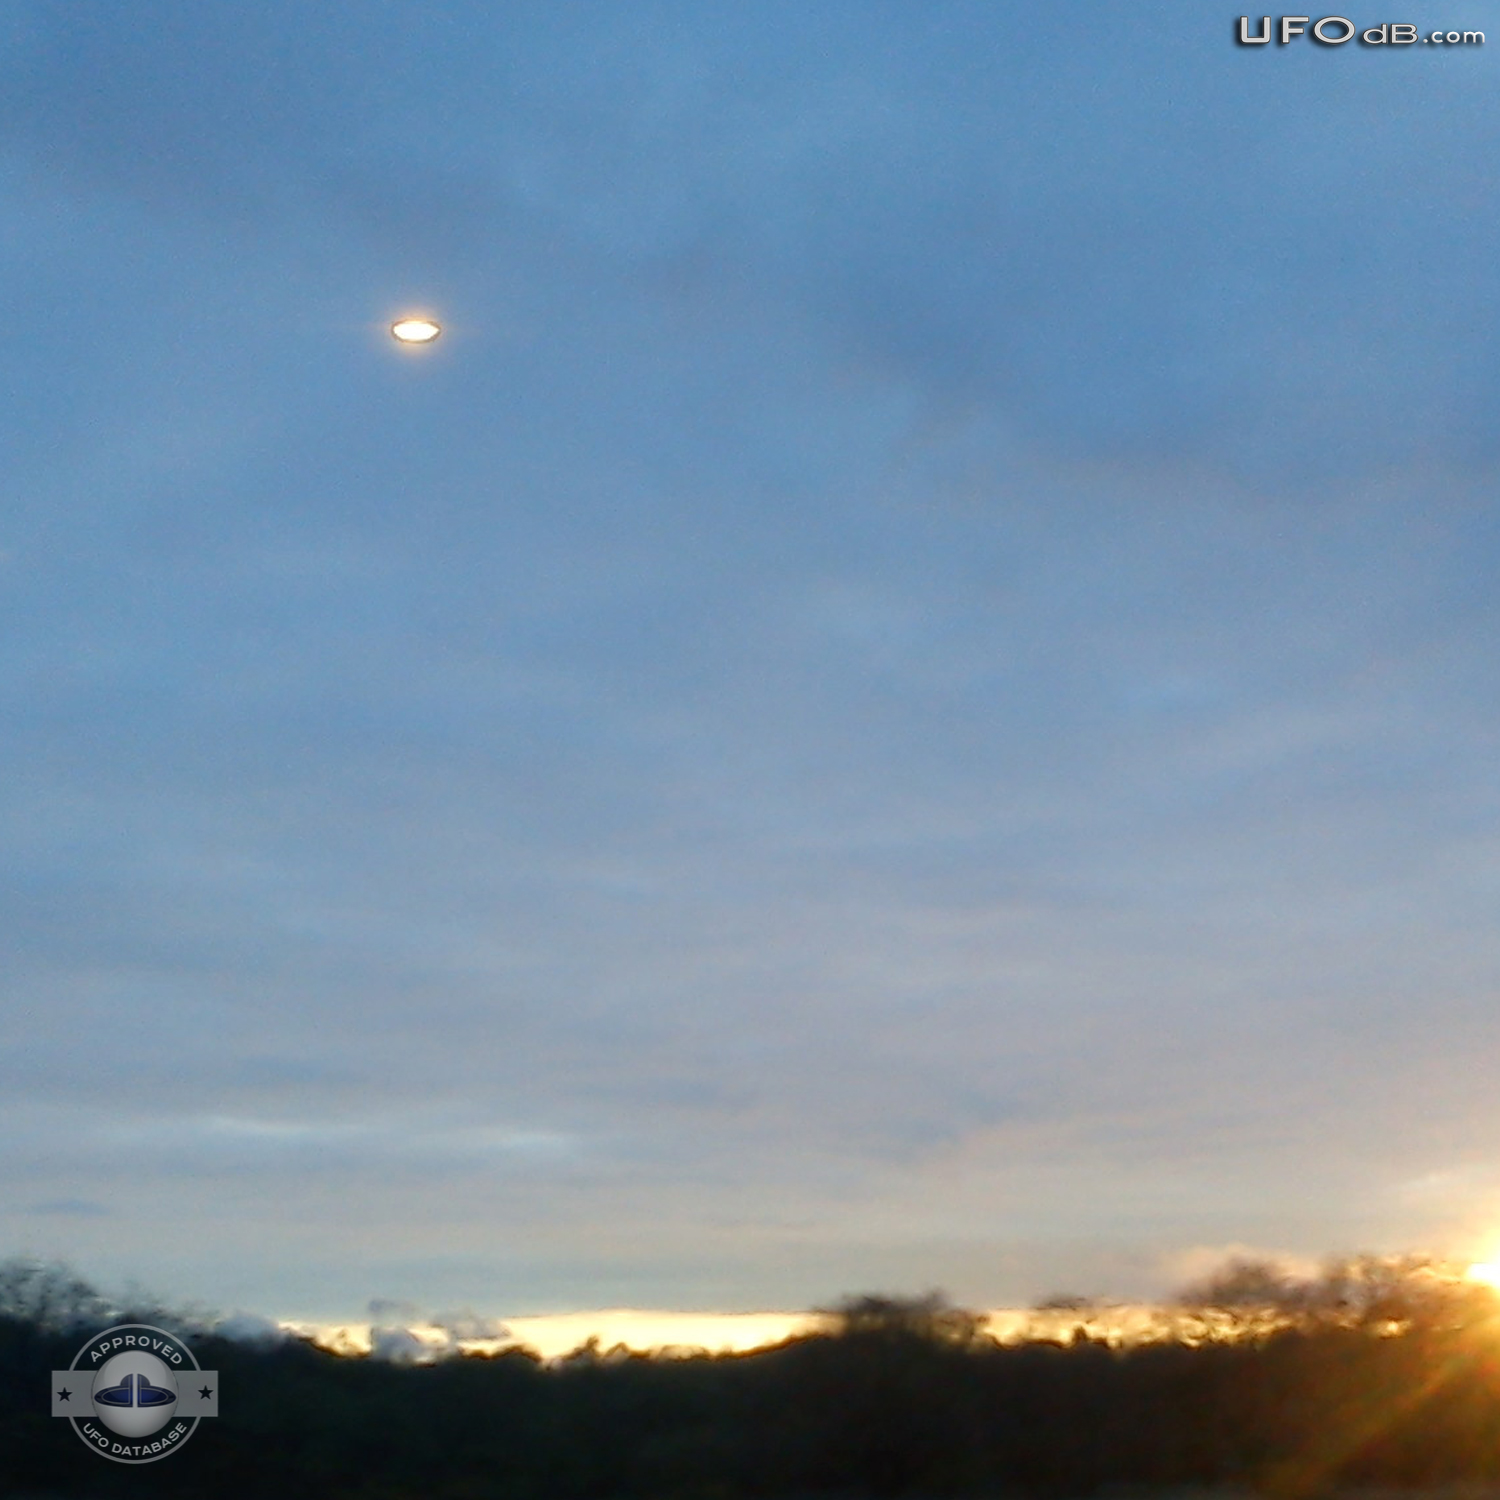 Darting UFO photographed from moving car | Bryncethin, Wales, UK 2011 UFO Picture #275-2